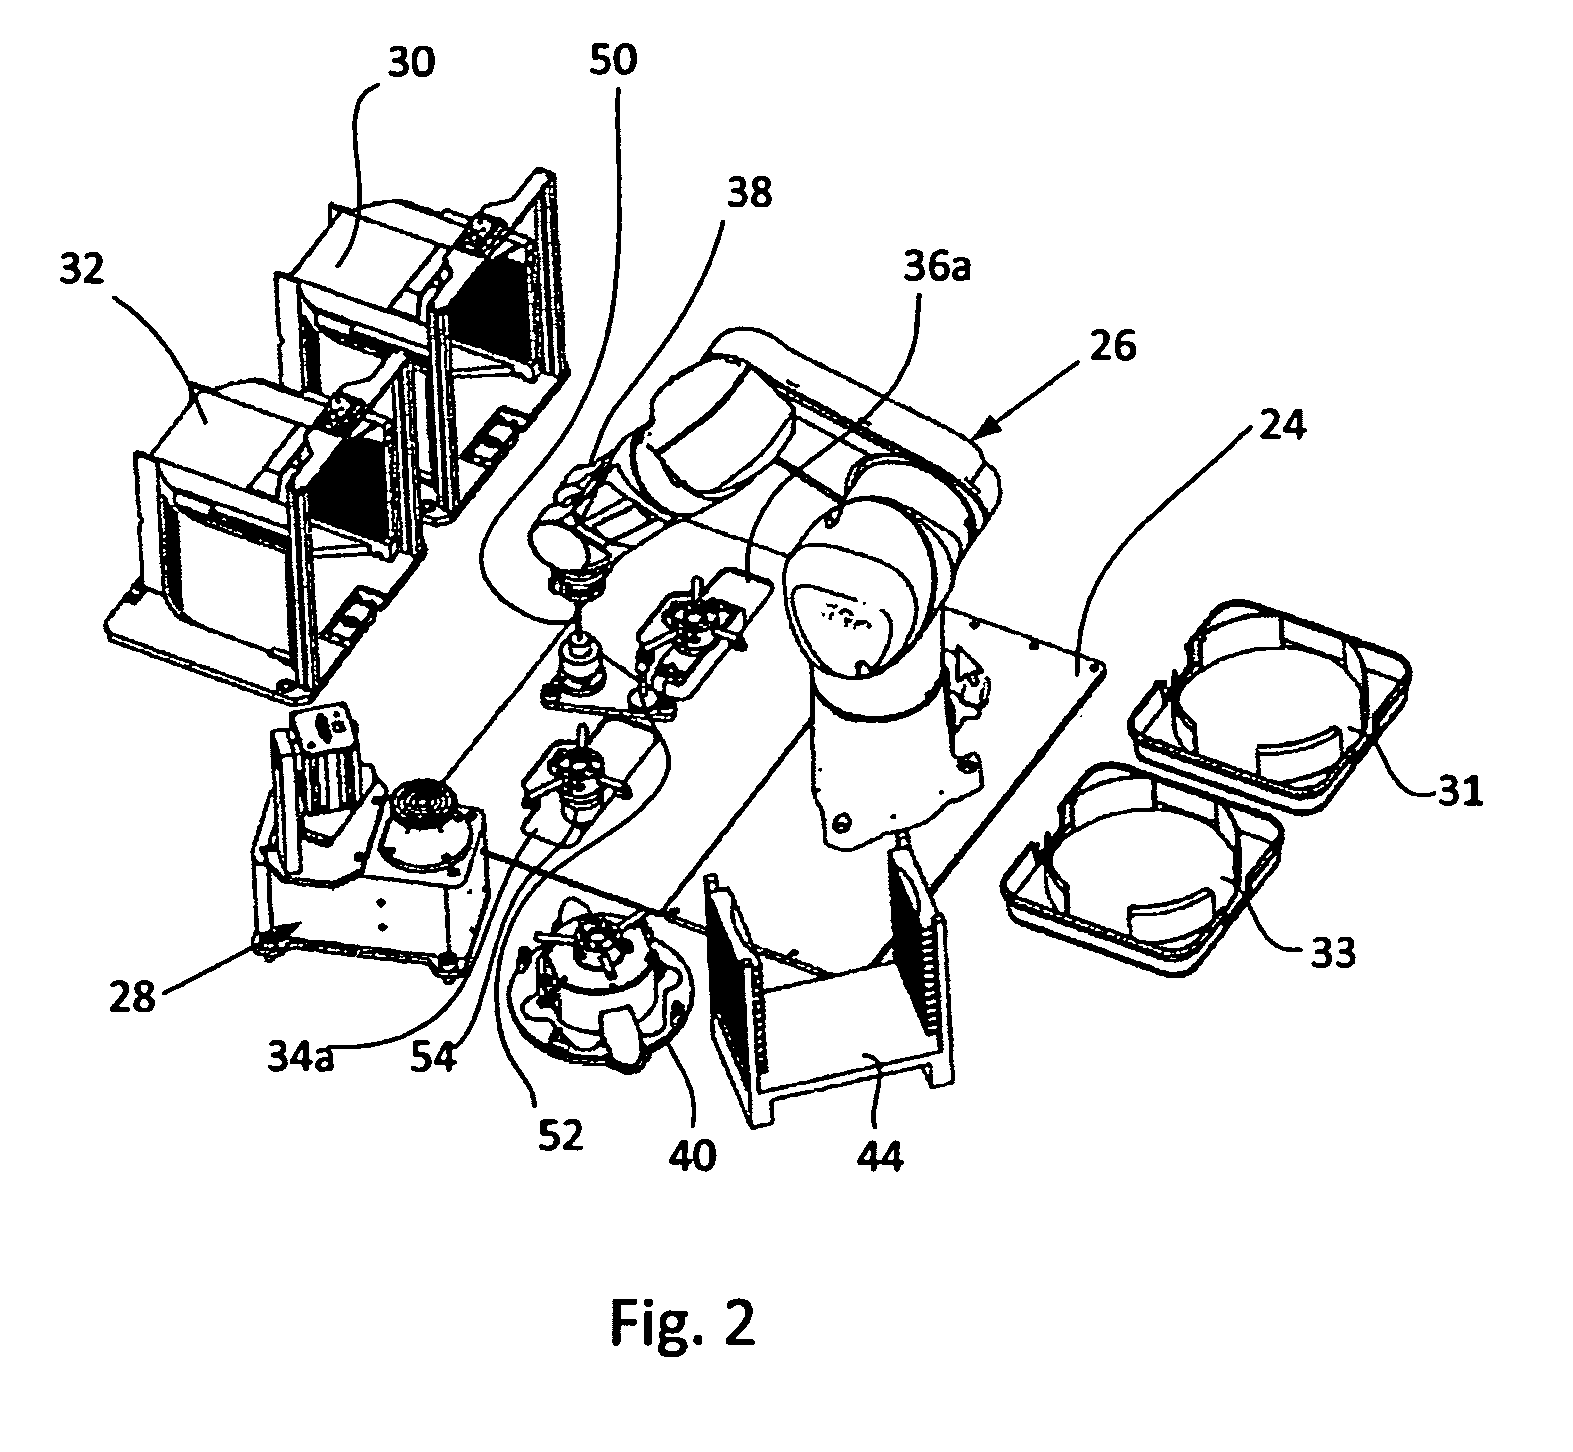 Method of teaching robotic station for processing objects